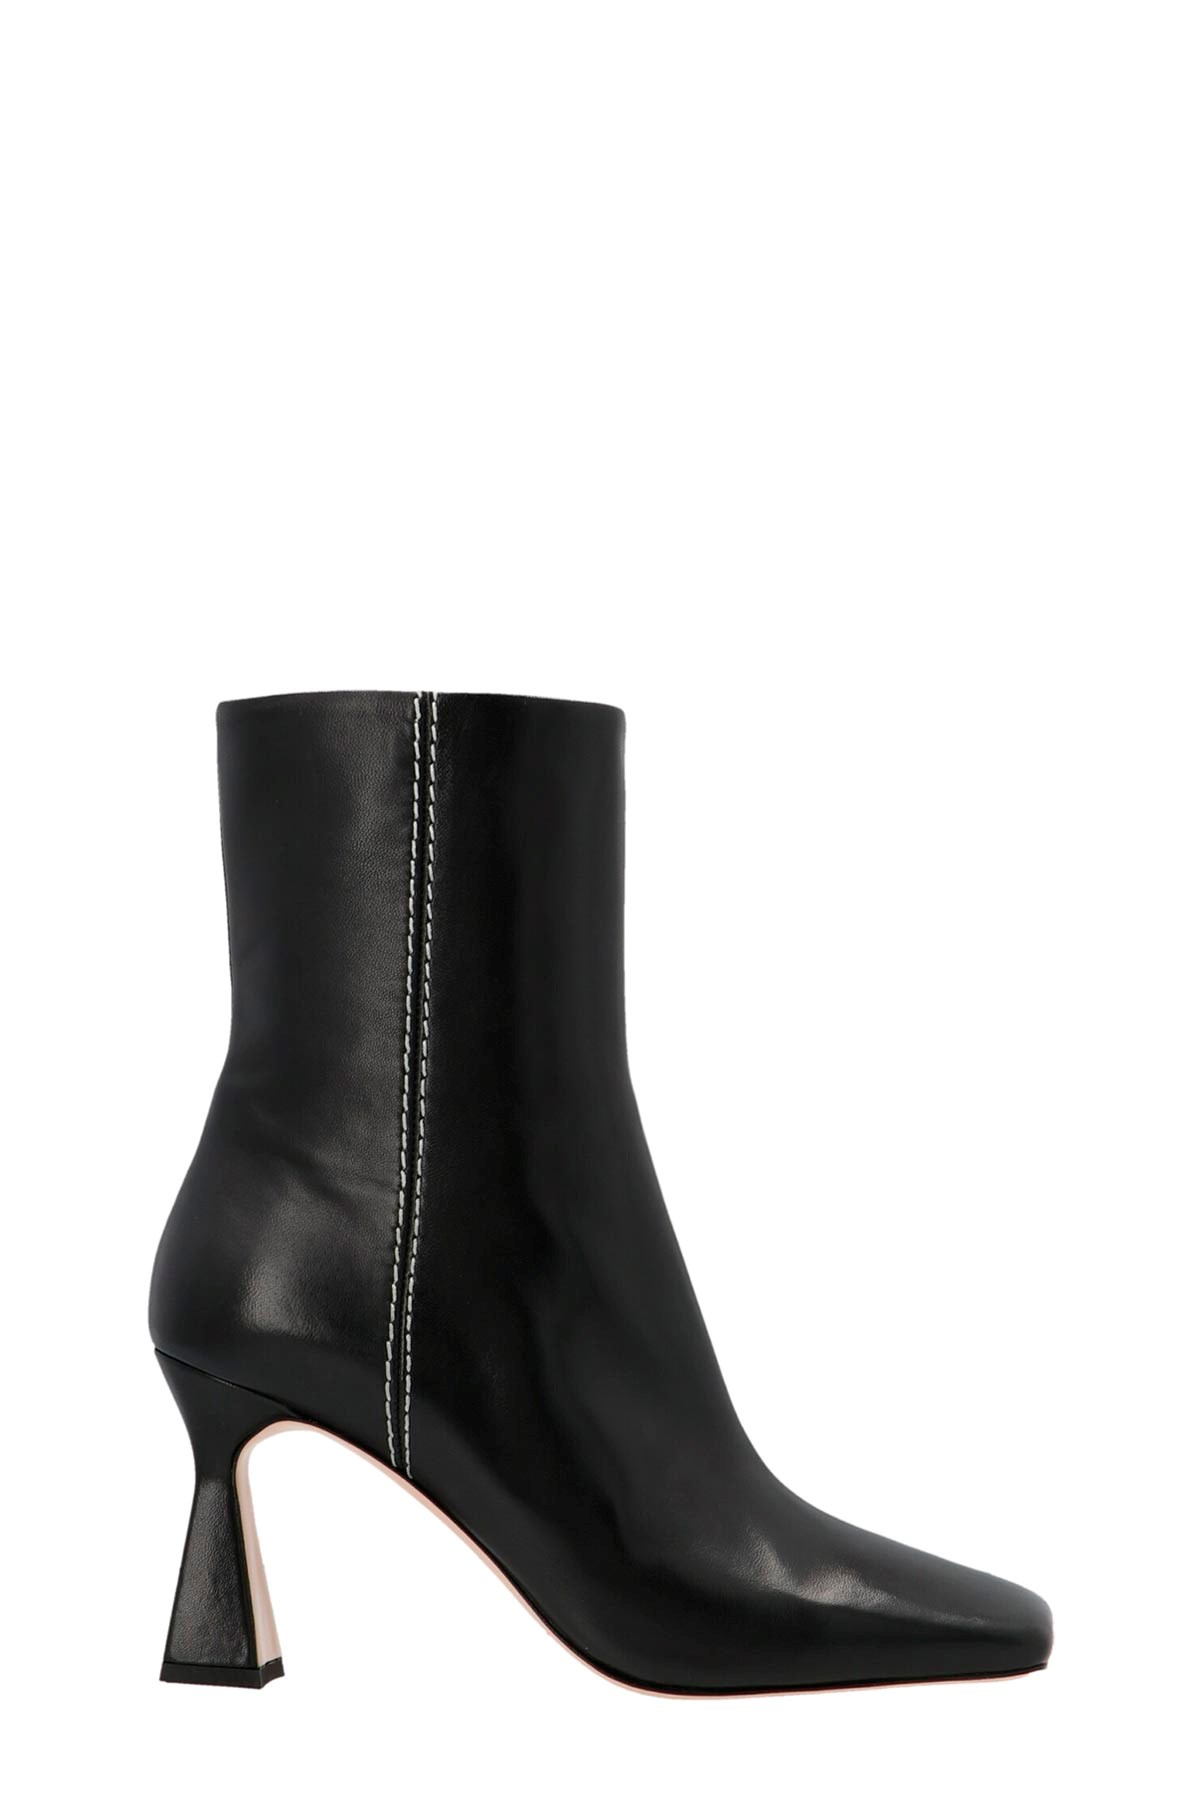 WANDLER 'Isa’ Ankle Boots